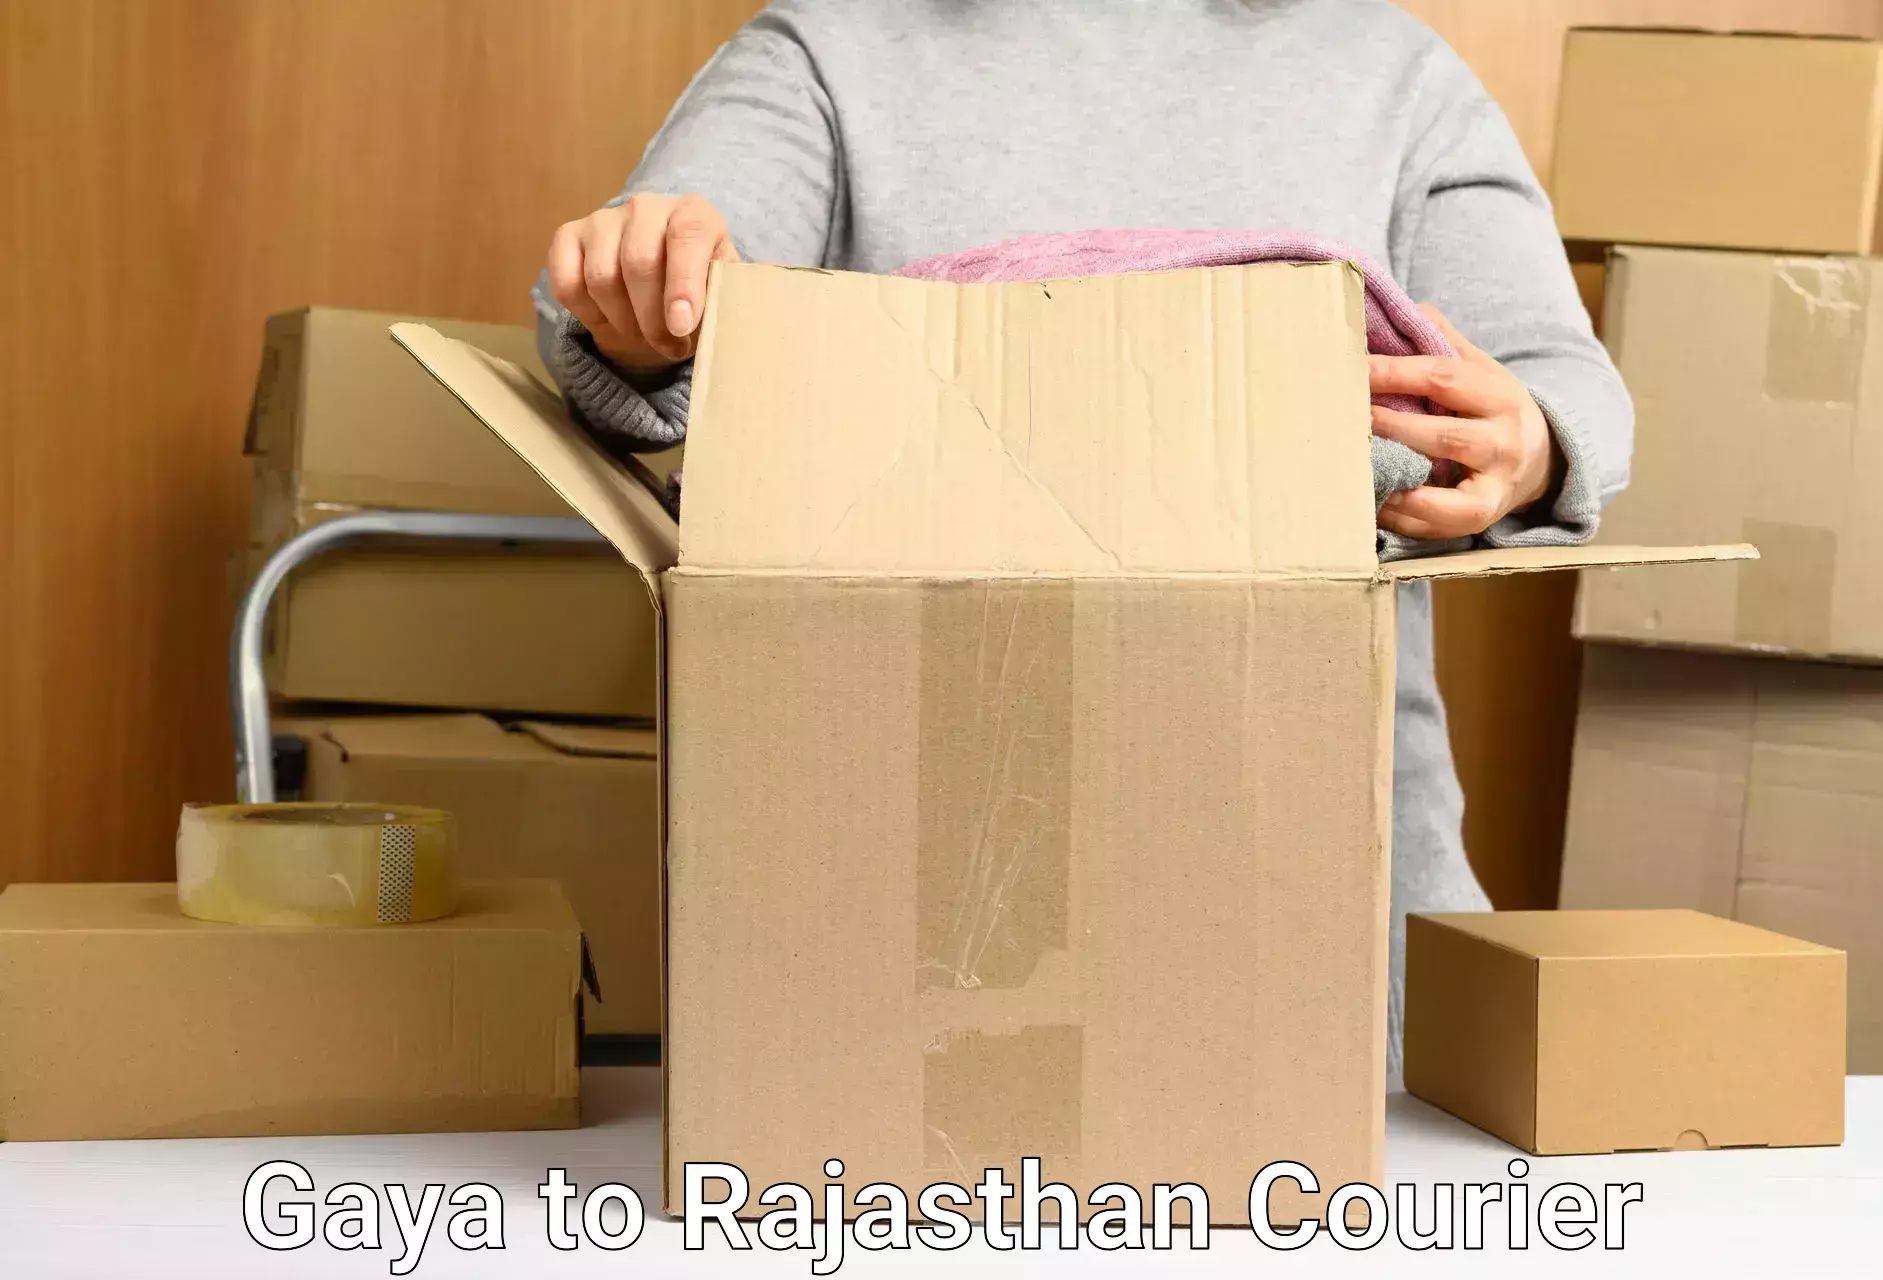 Courier service comparison Gaya to Rajasthan